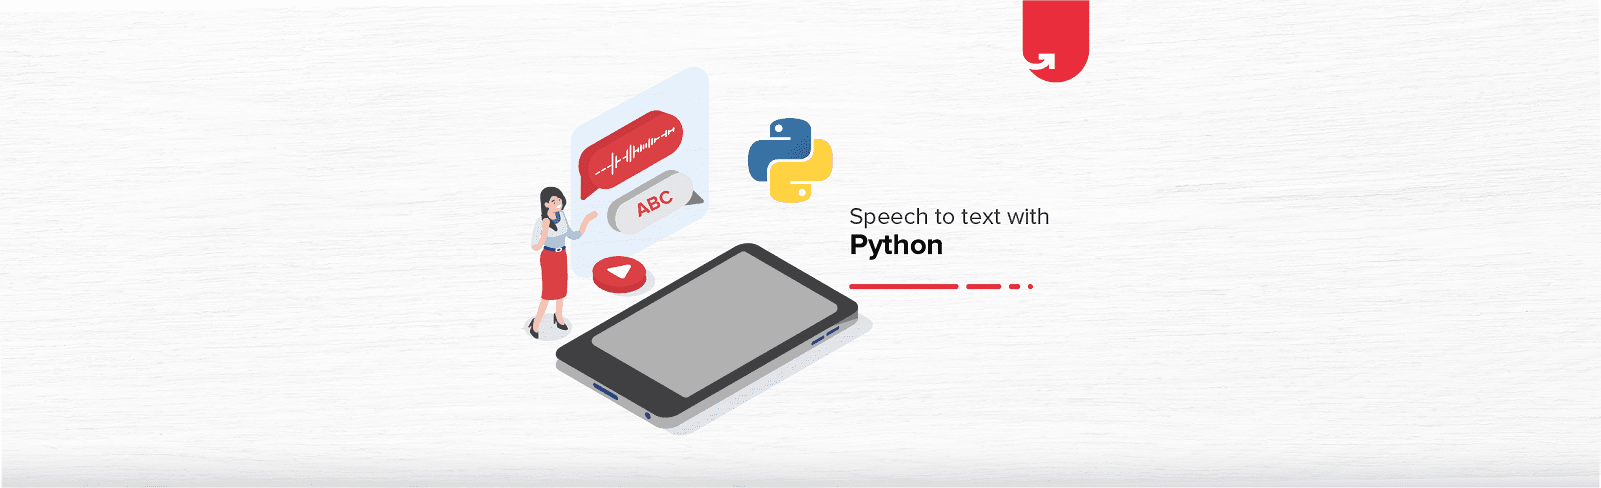 How To Convert Speech to Text with Python [Step-by-Step Process]